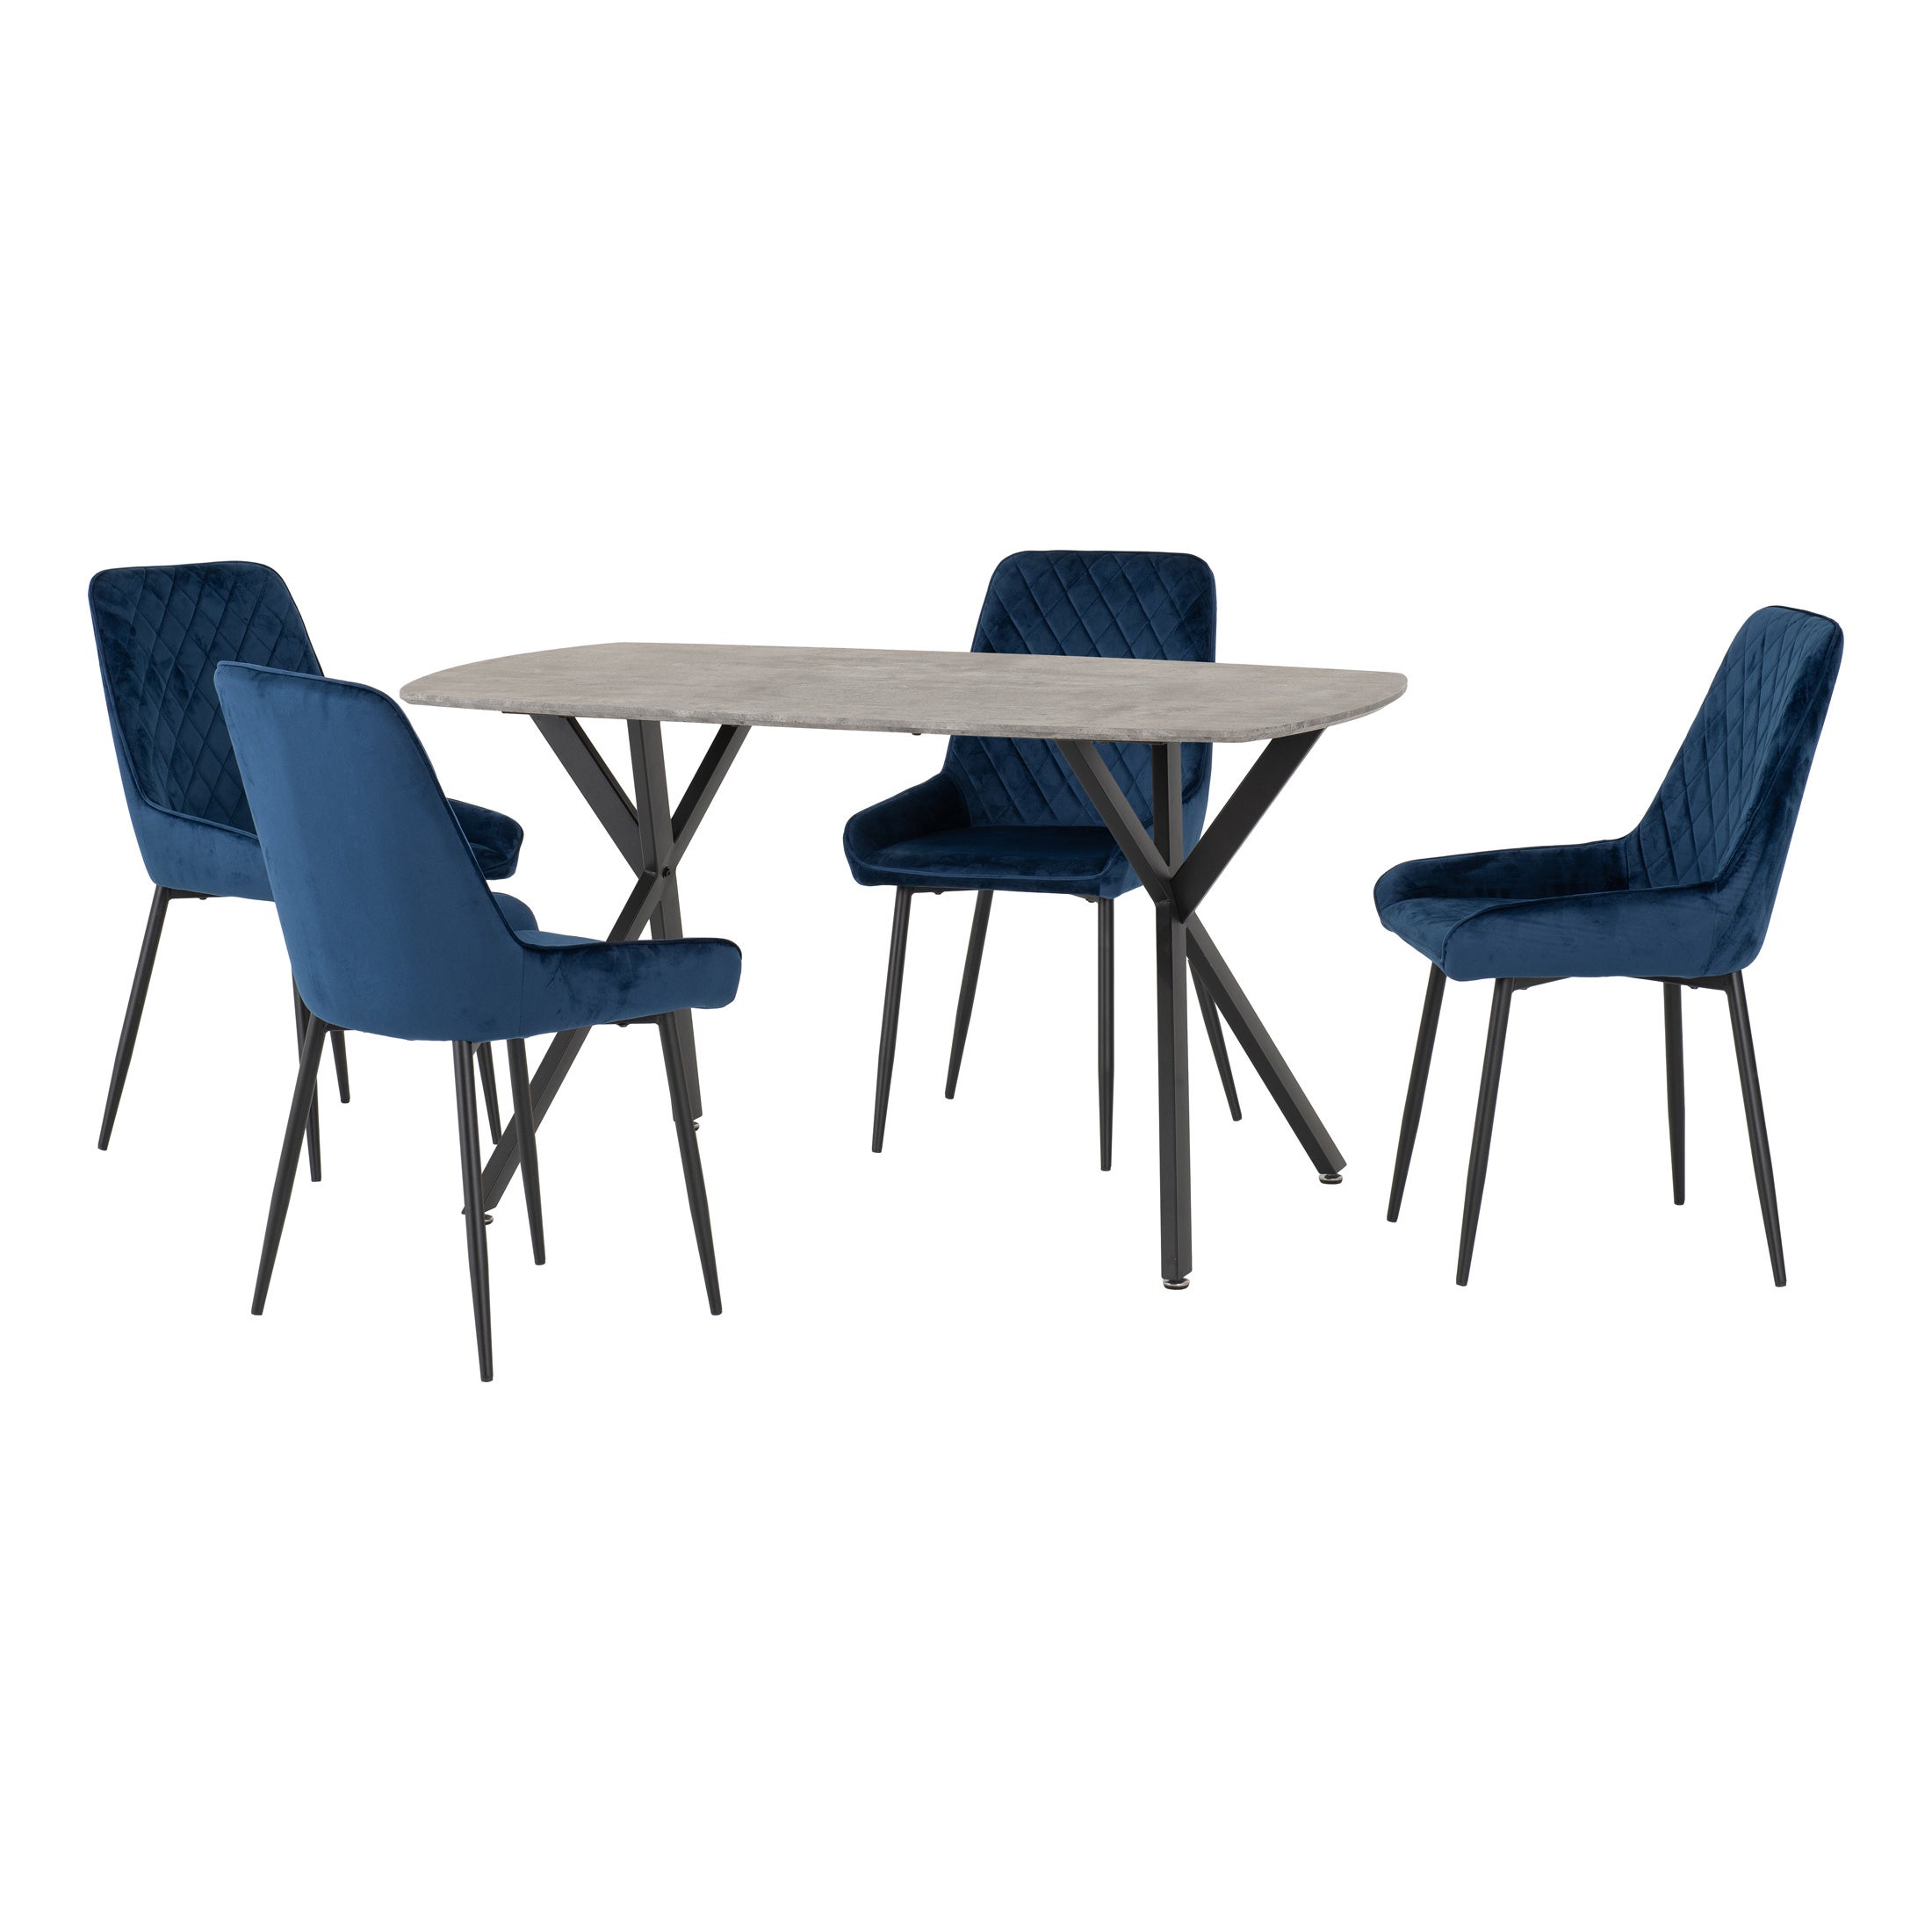 Athens Rectangular Dining Table with 4 Avery Chairs, Concrete Effect Navy Blue